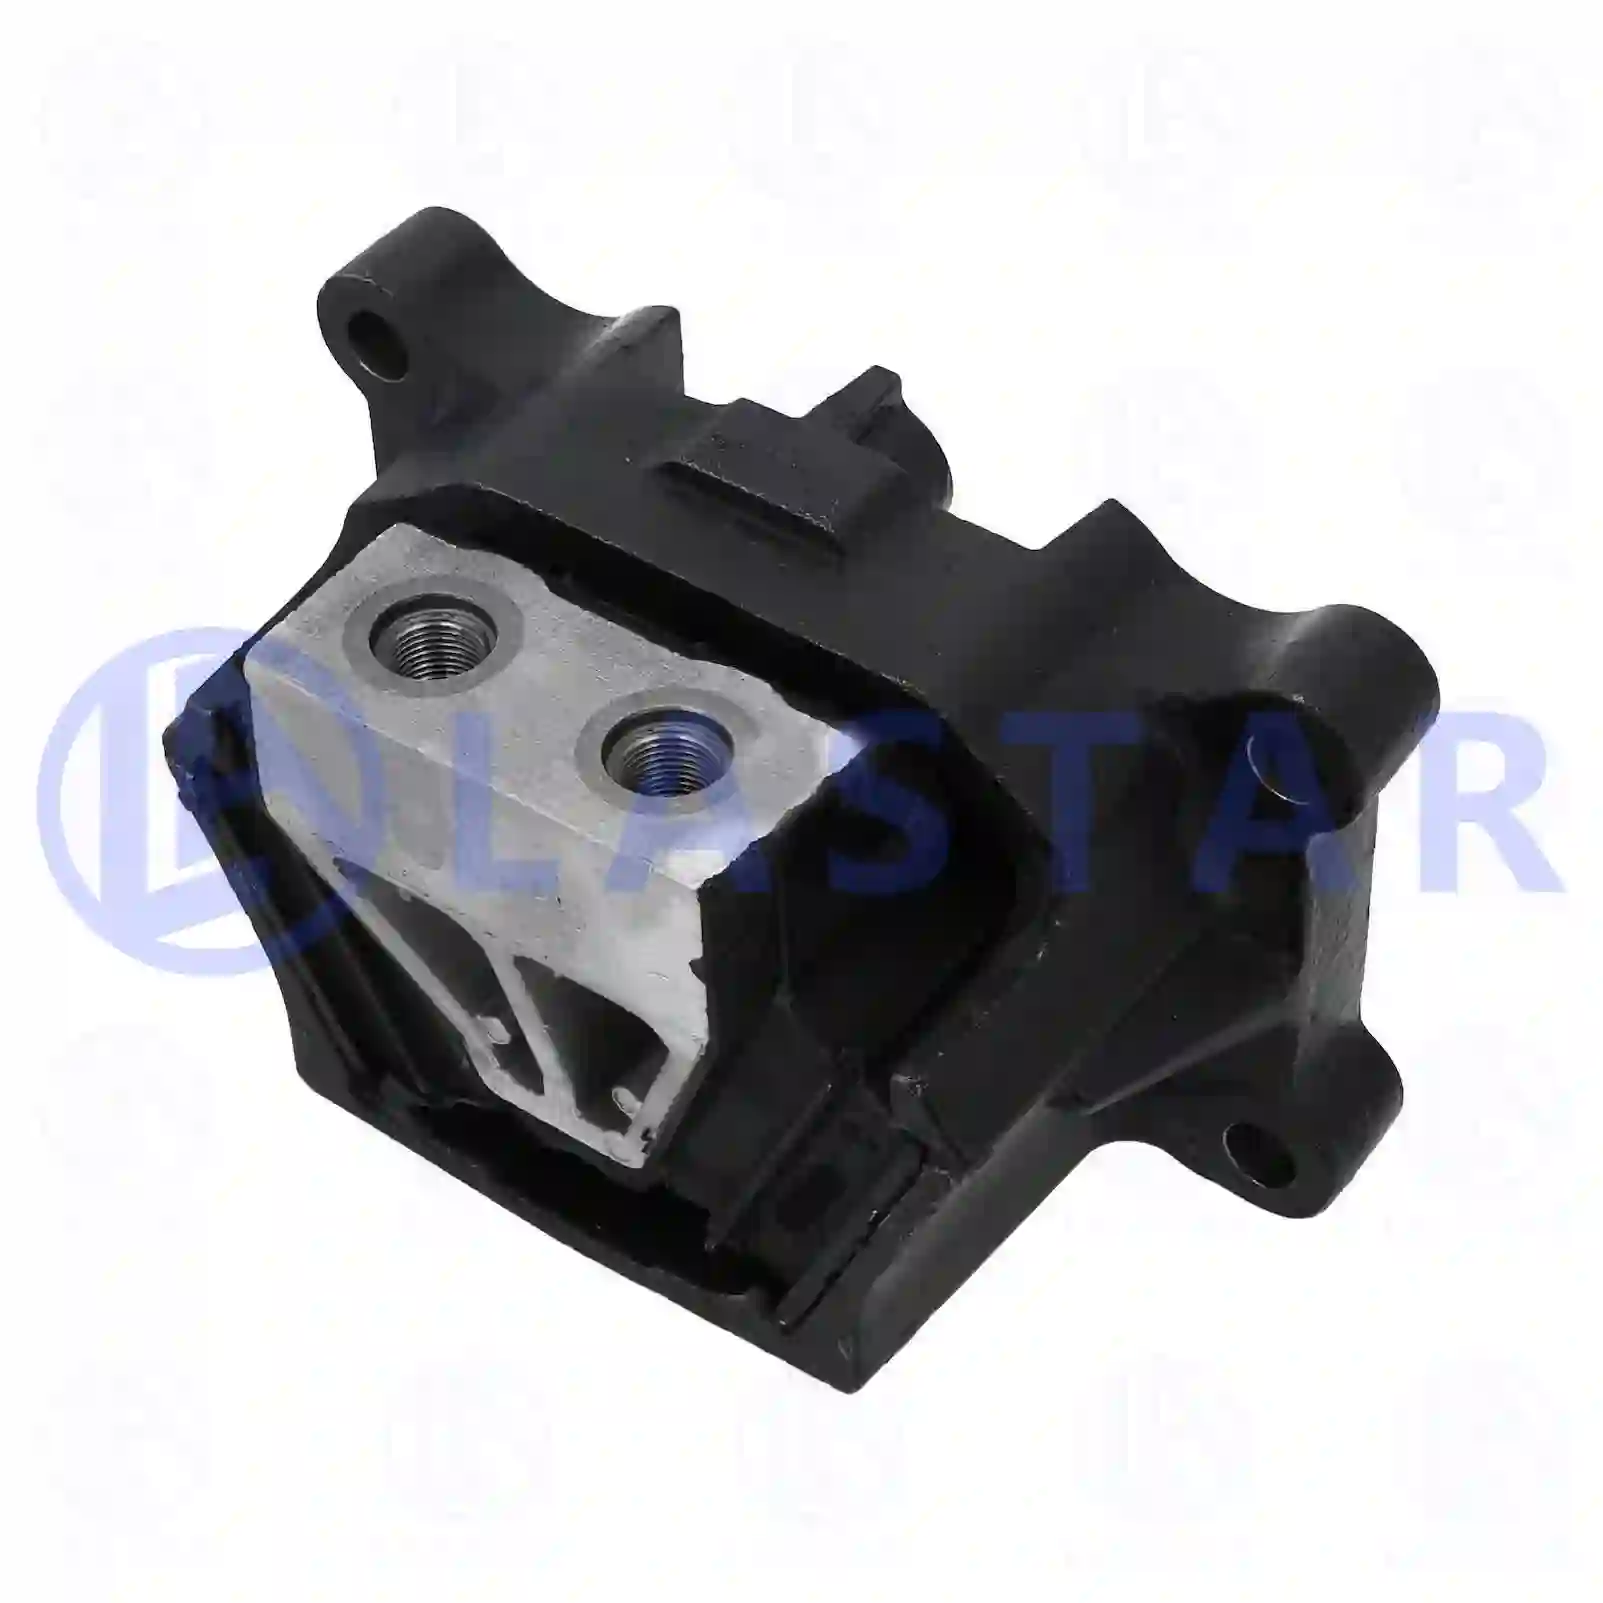 Engine mounting, 77702418, 9412418713, , , , , ||  77702418 Lastar Spare Part | Truck Spare Parts, Auotomotive Spare Parts Engine mounting, 77702418, 9412418713, , , , , ||  77702418 Lastar Spare Part | Truck Spare Parts, Auotomotive Spare Parts